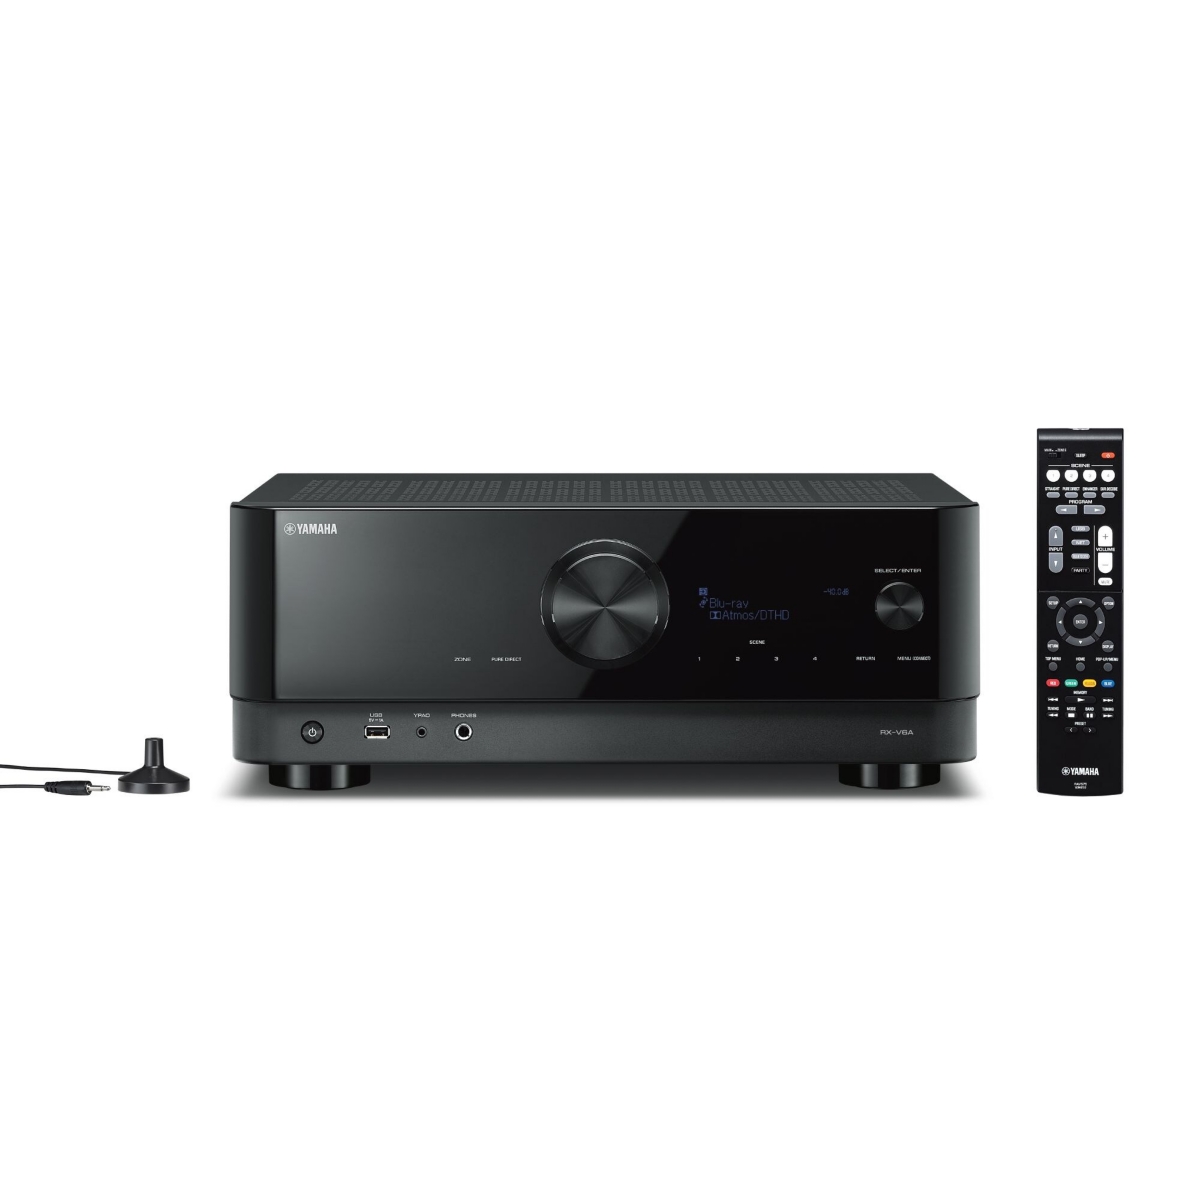 Yamaha Rx-V6 7.2-Channel Av Receiver with 8K Hdmi and MusicCast - Black